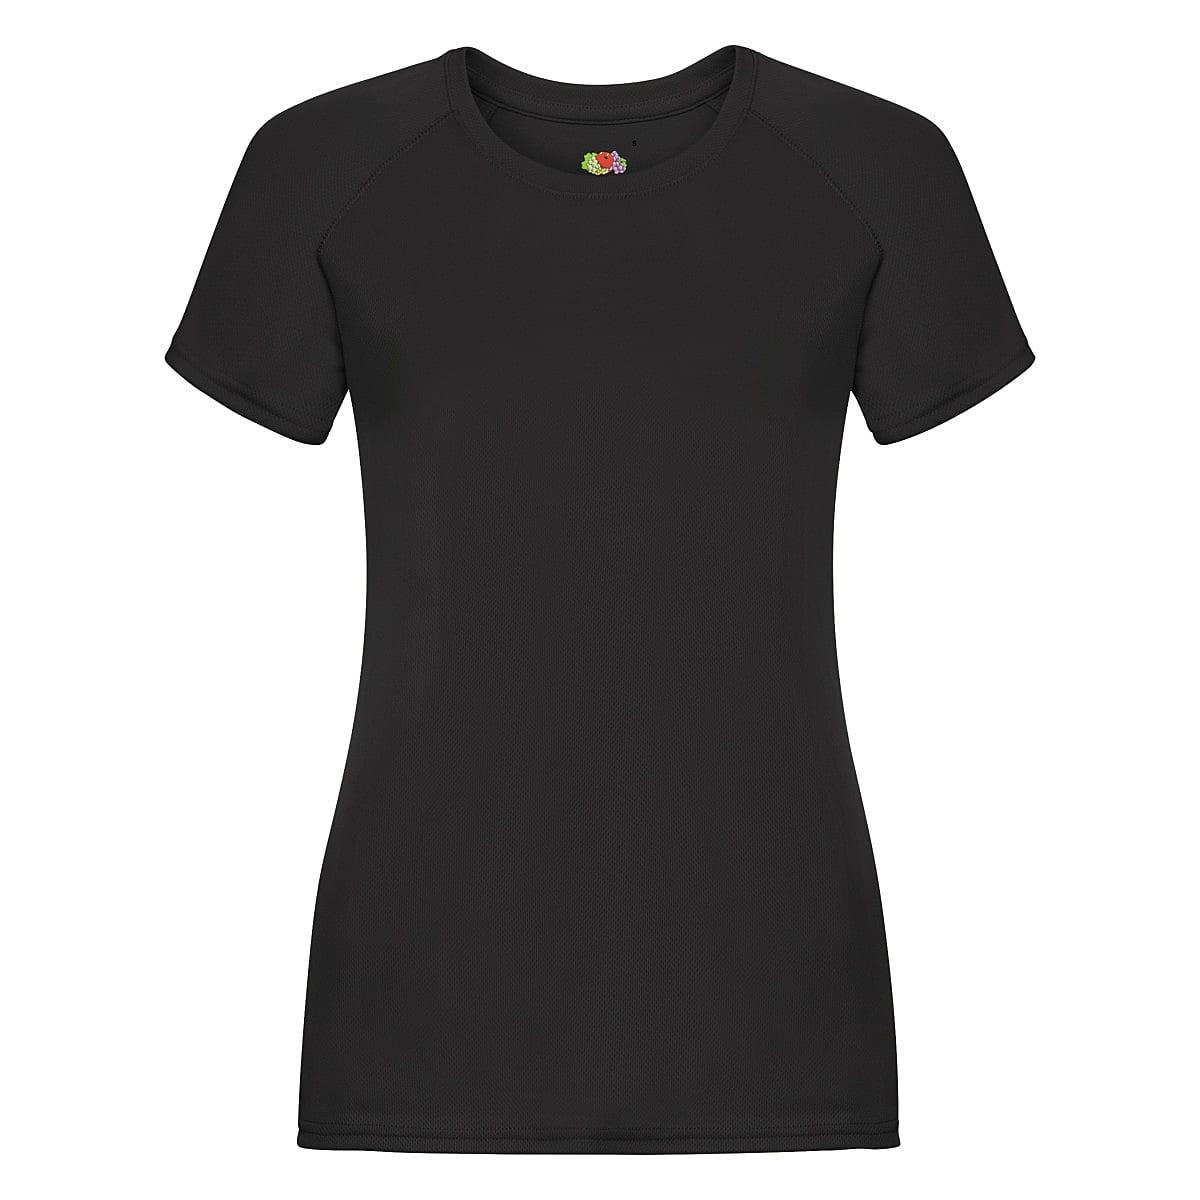 Fruit Of The Loom Womens Performance T-Shirt in Black (Product Code: 61392)